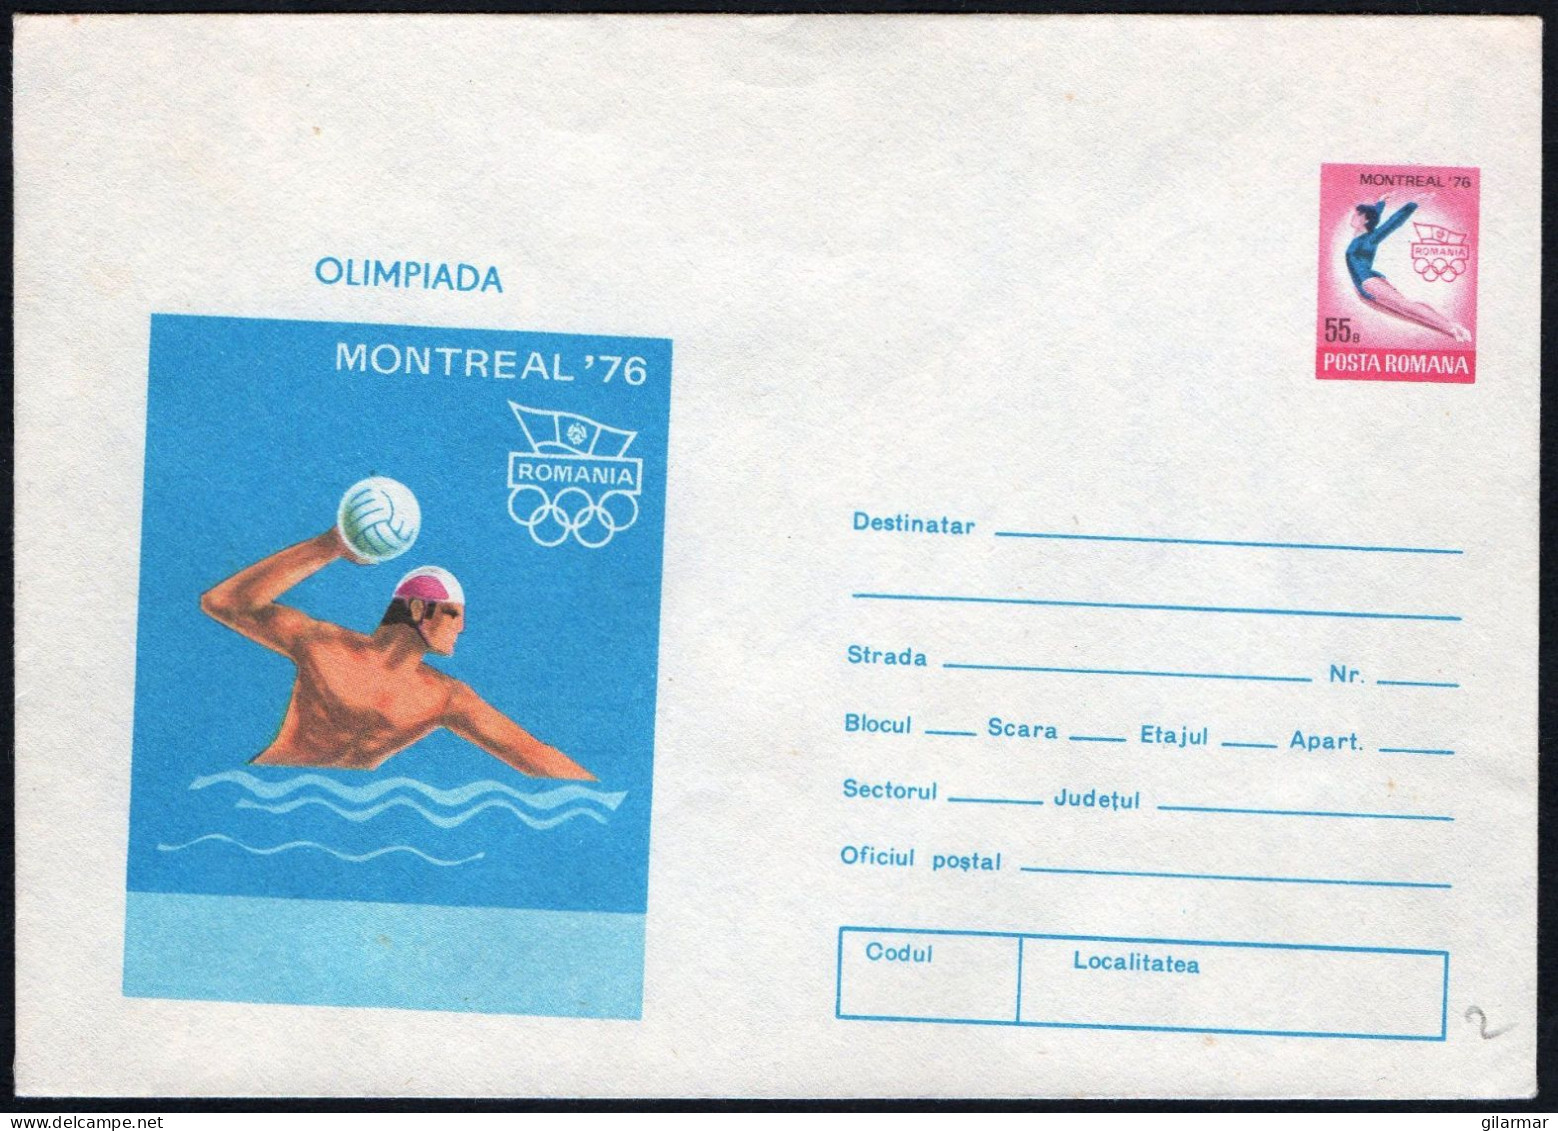 ROMANIA 1976 - OLYMPIC GAMES MONTREAL 1976 - STATIONARY: WATER POLO - MINT - G - Wasserball